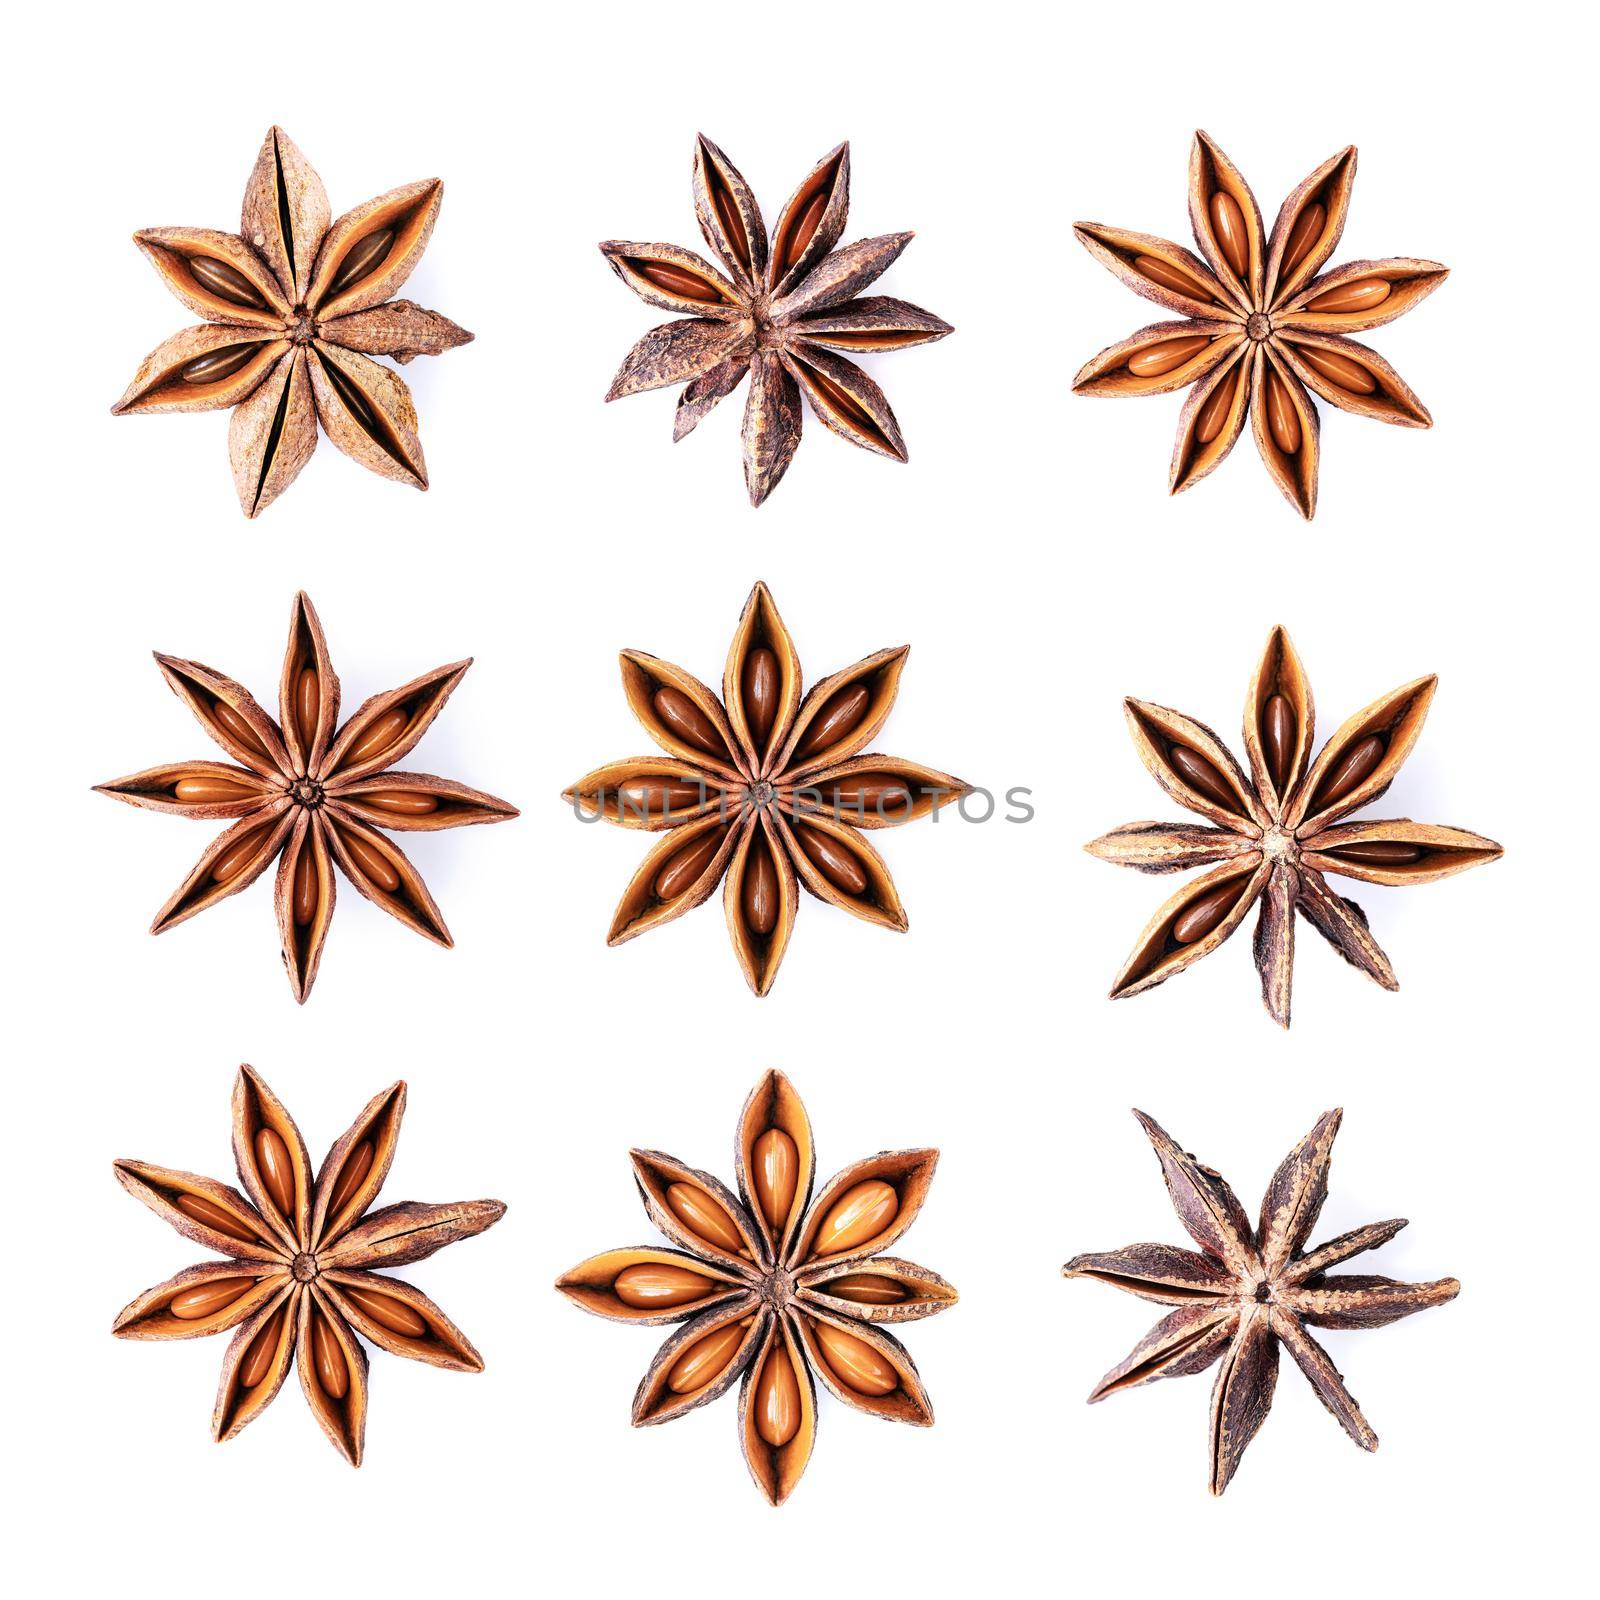 Various shapes of dried Chinese star anise isolated on white background. by kerdkanno